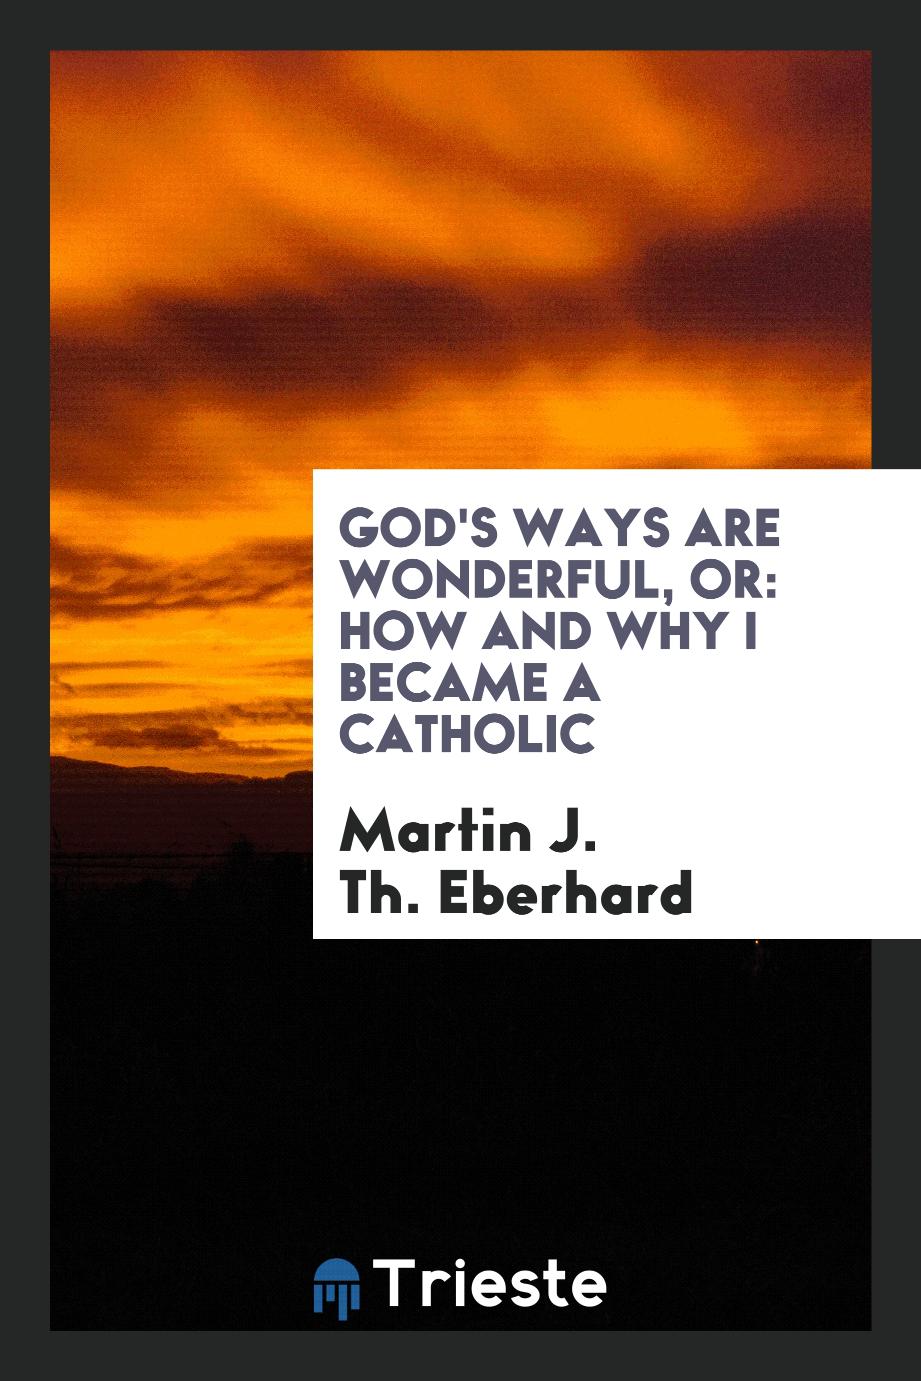 God's ways are wonderful, or: How and why I became a Catholic